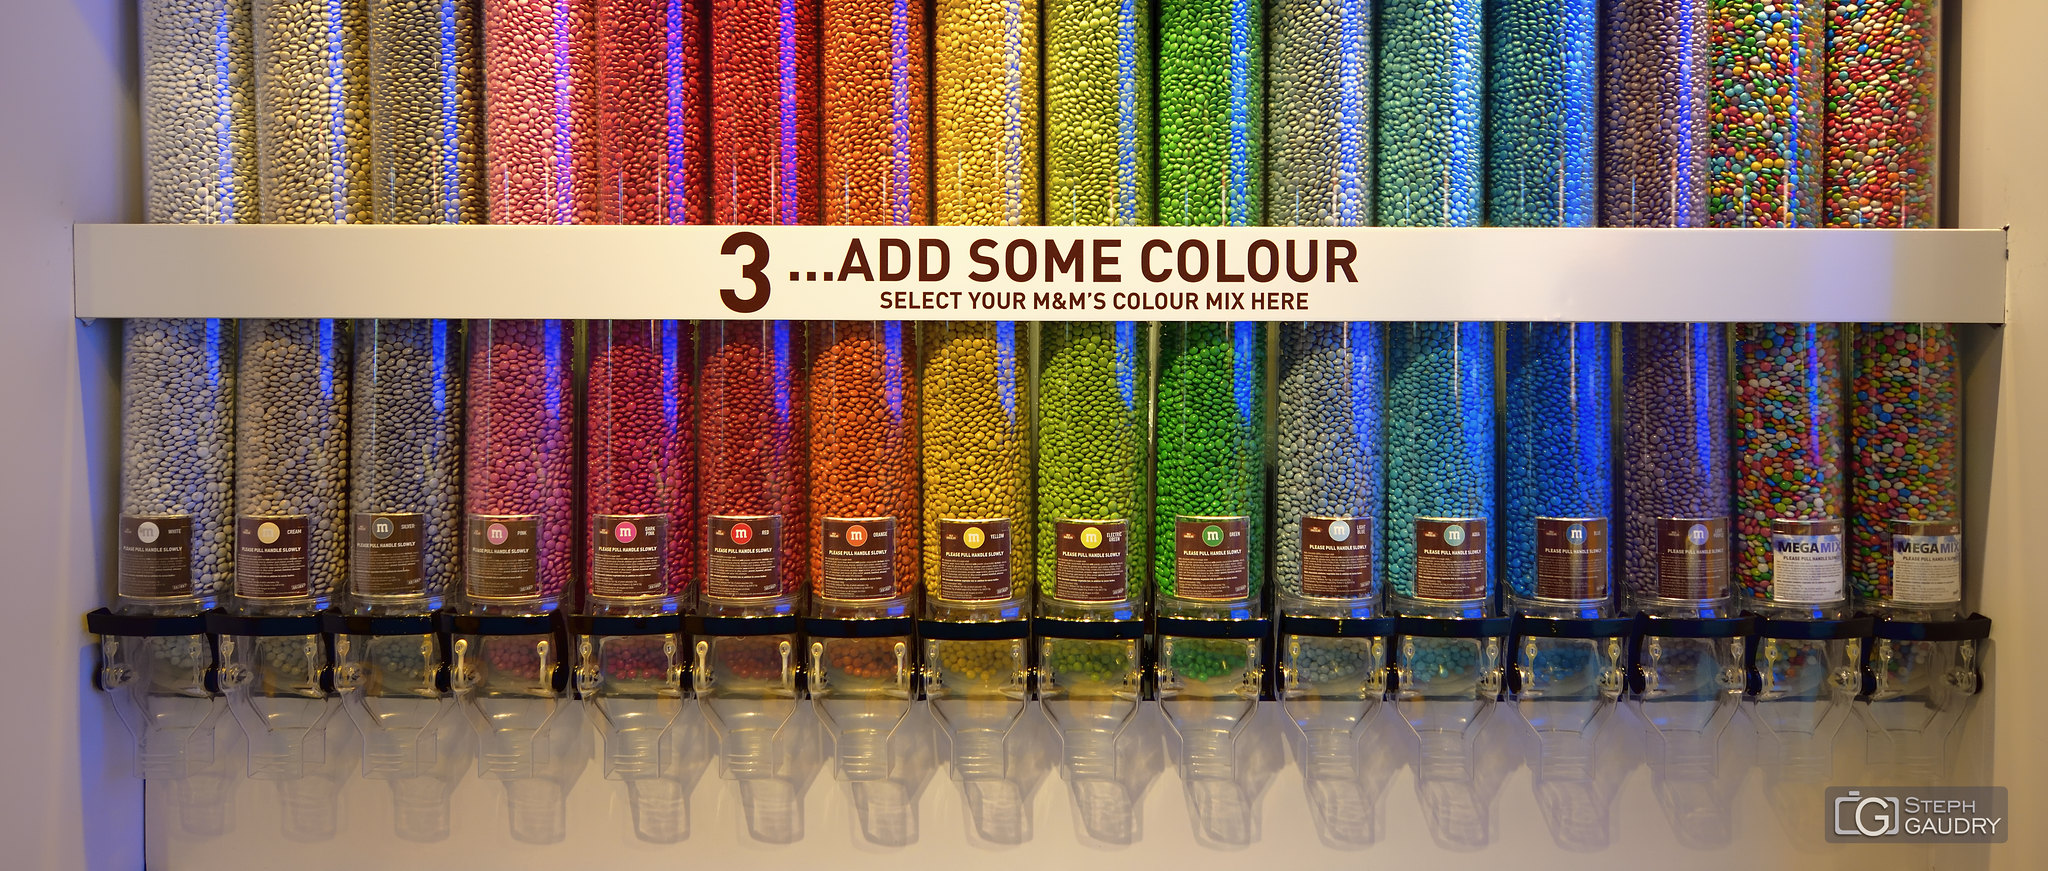 Add some colour with M&M's colour mix [Click to start slideshow]